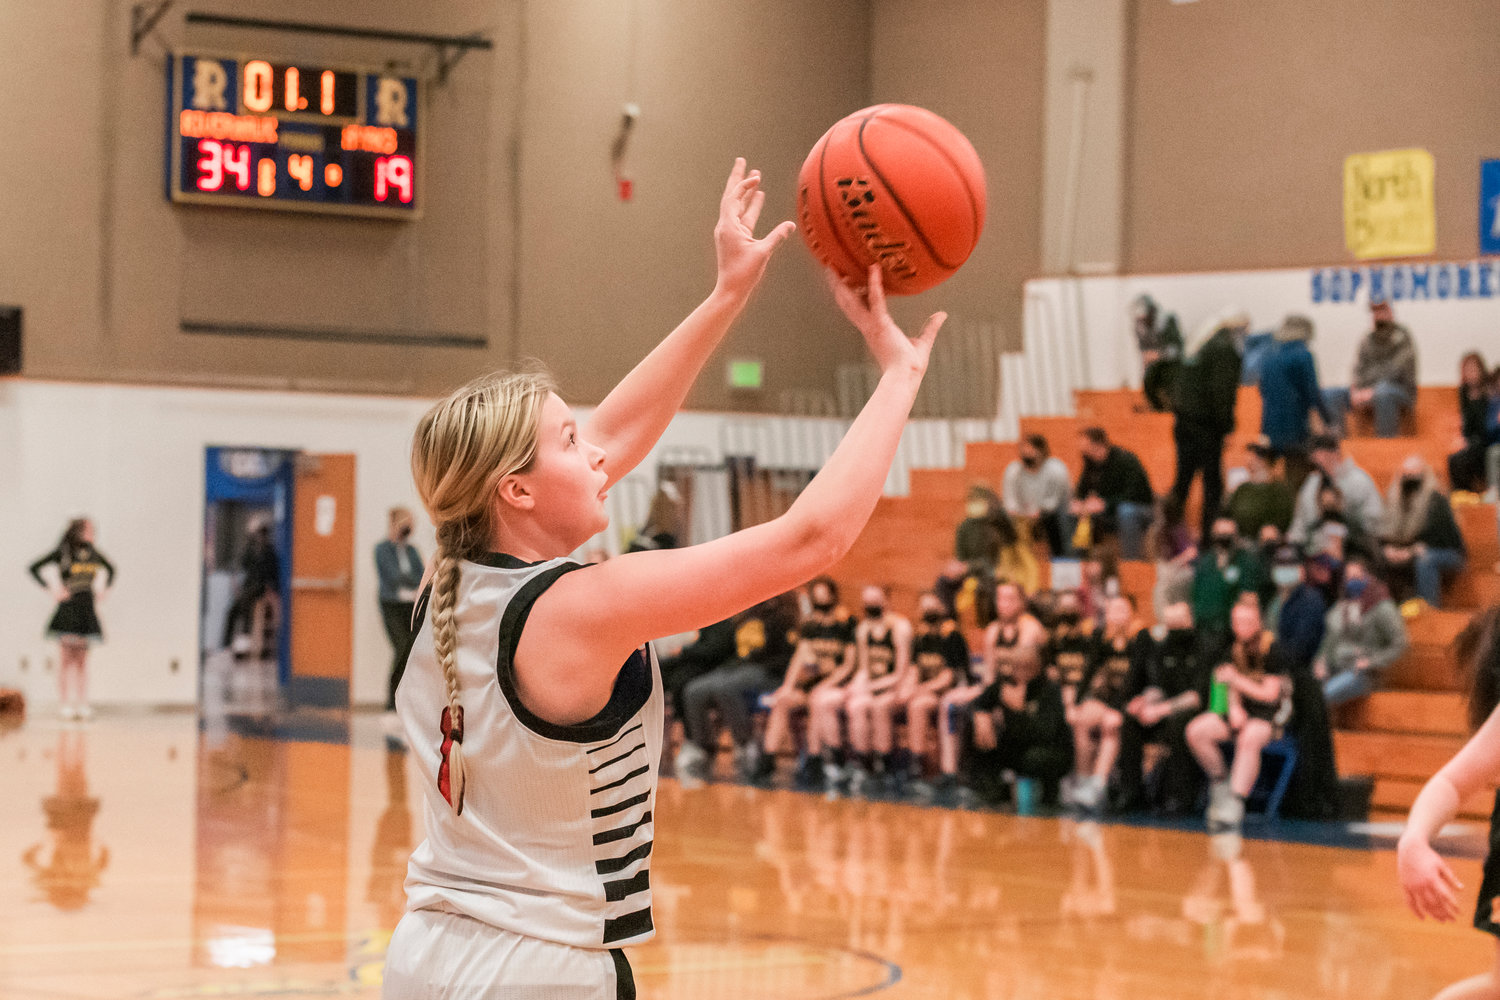 Toledo’s Destiny Gifford (1) drains a three-point shot to end the game Tuesday night at Rochester High School.